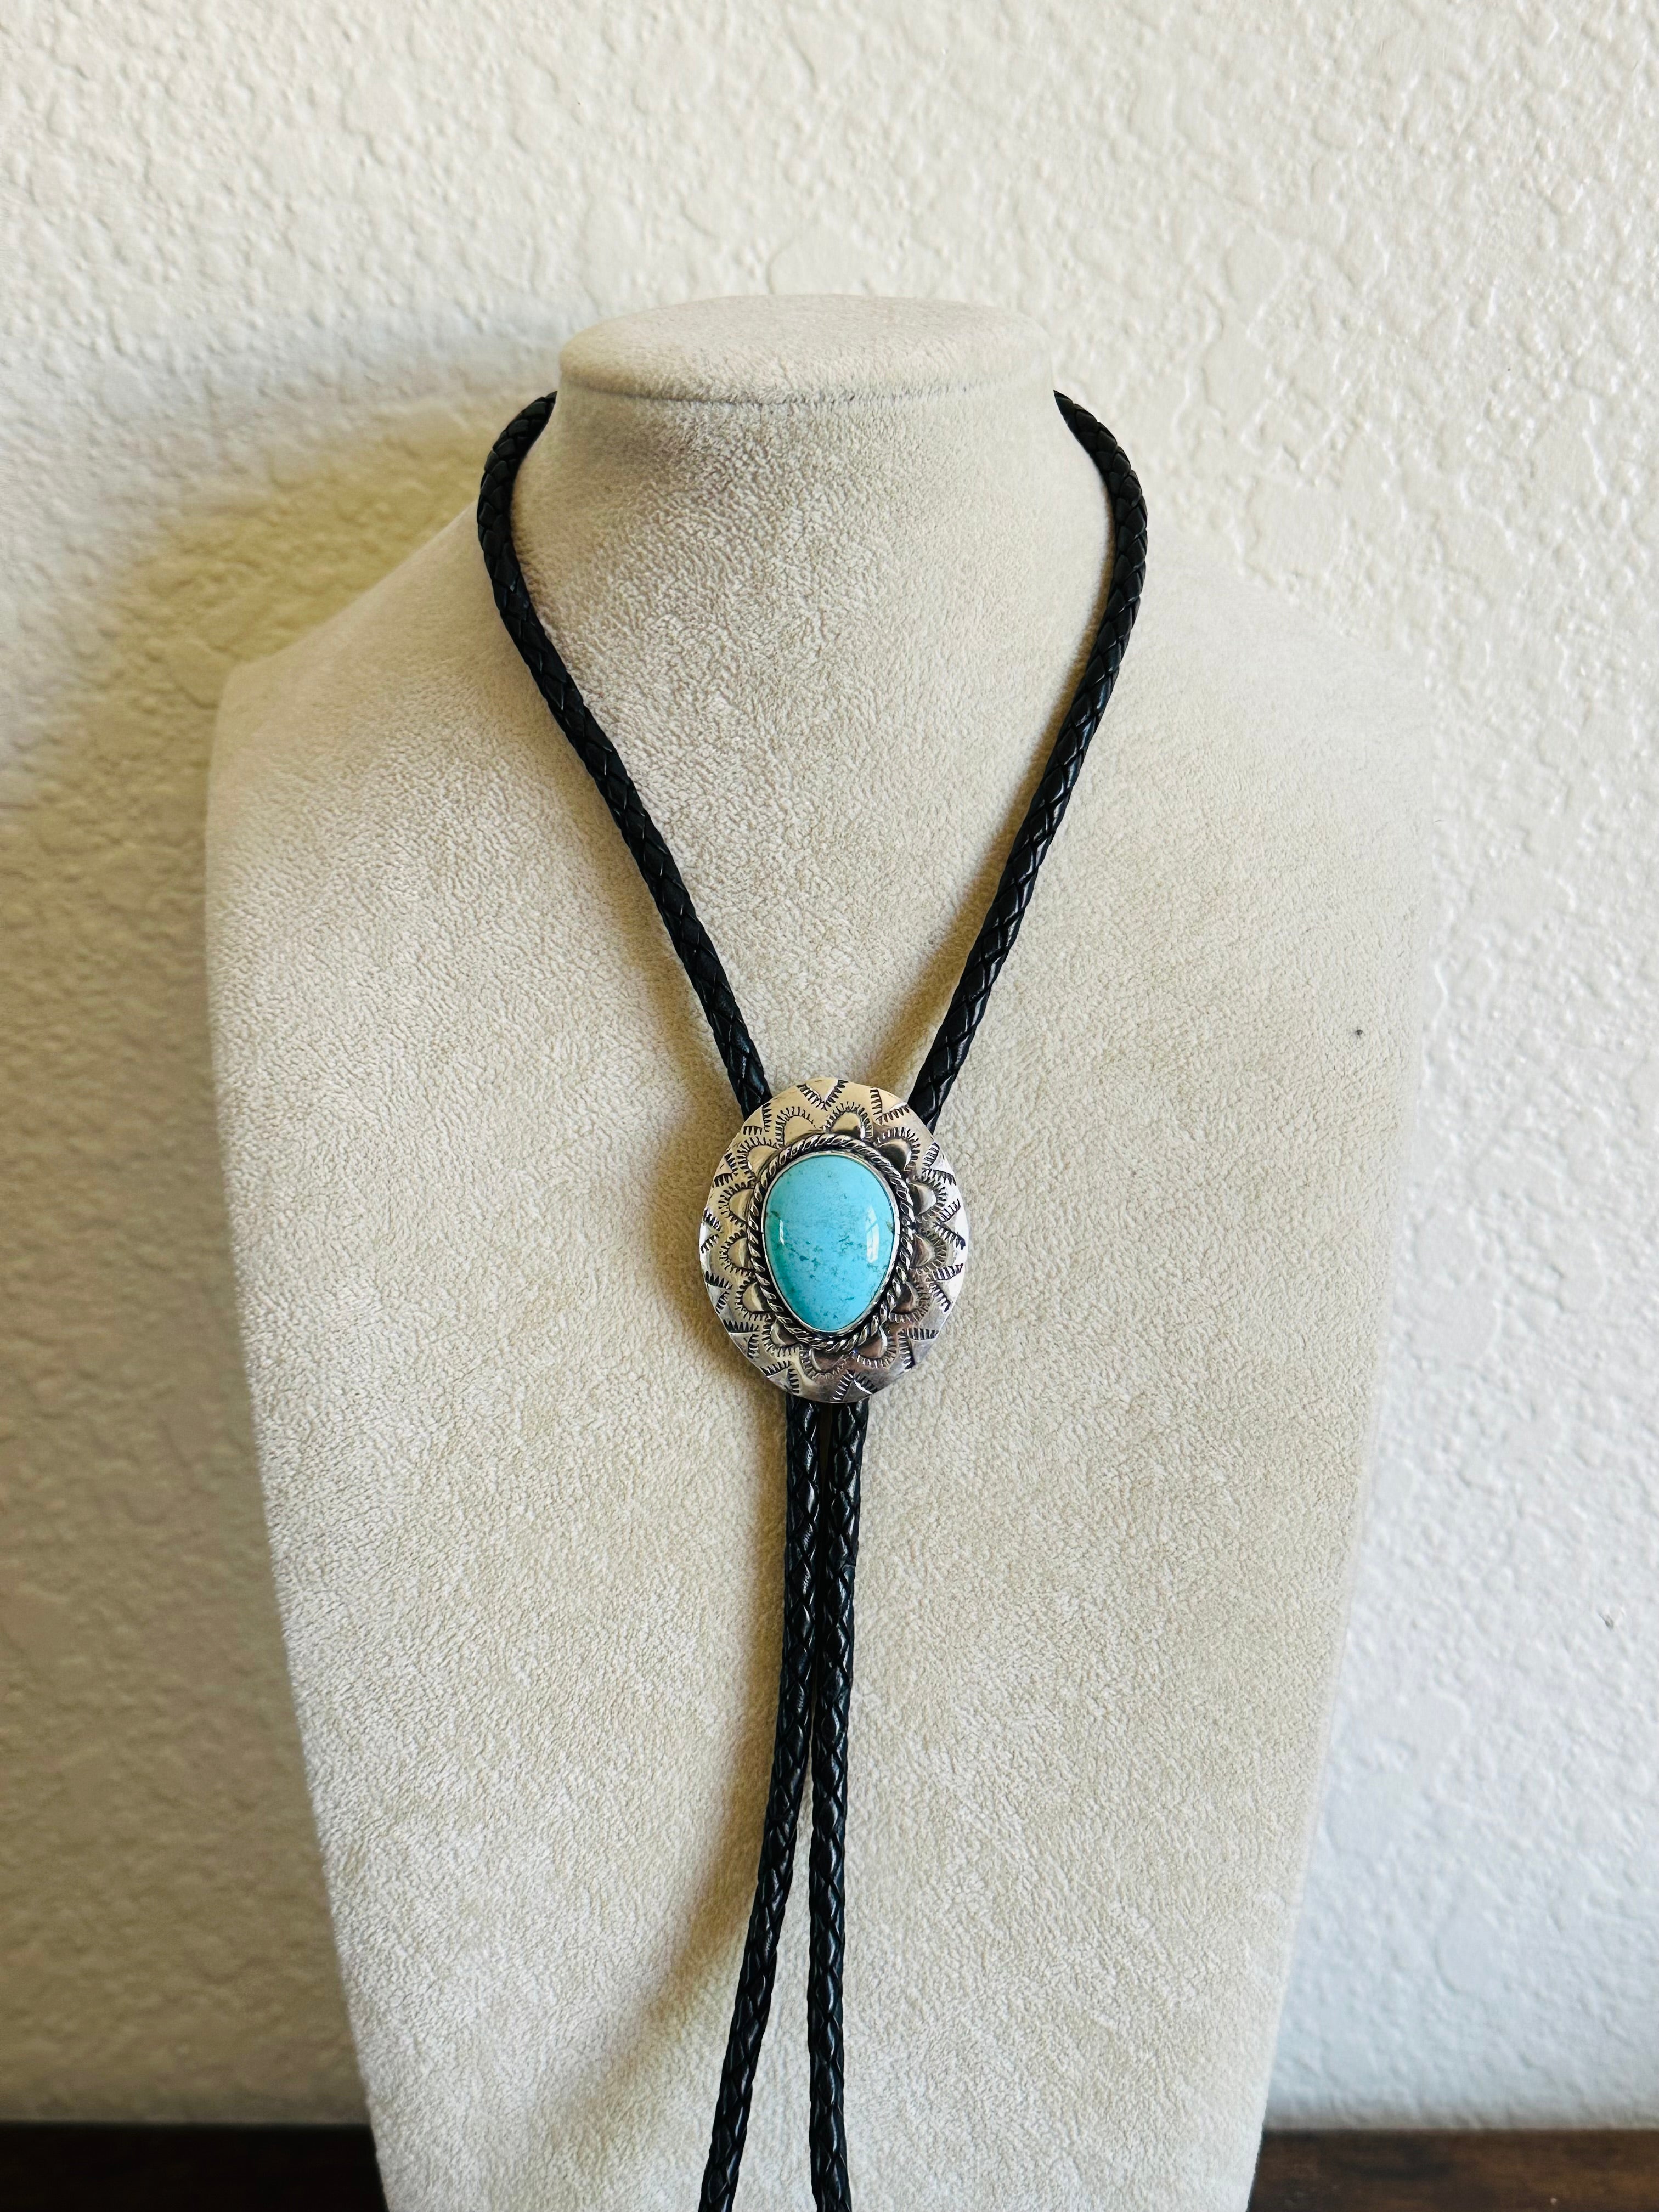 Navajo Made Kingman Turquoise & Sterling Silver Necklace Bolo